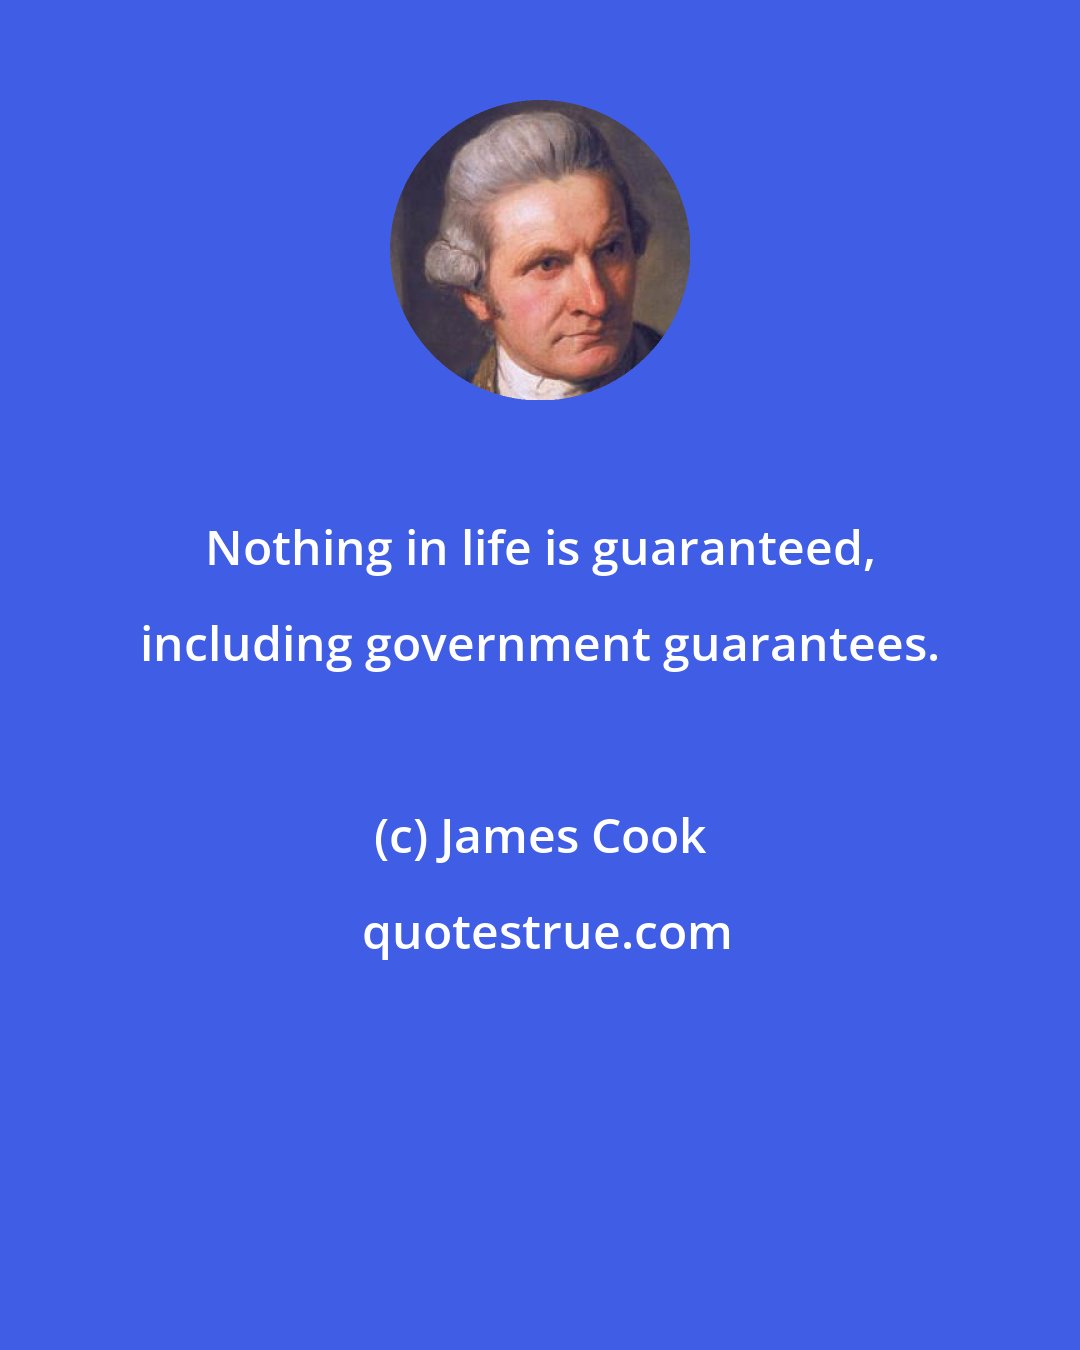 James Cook: Nothing in life is guaranteed, including government guarantees.